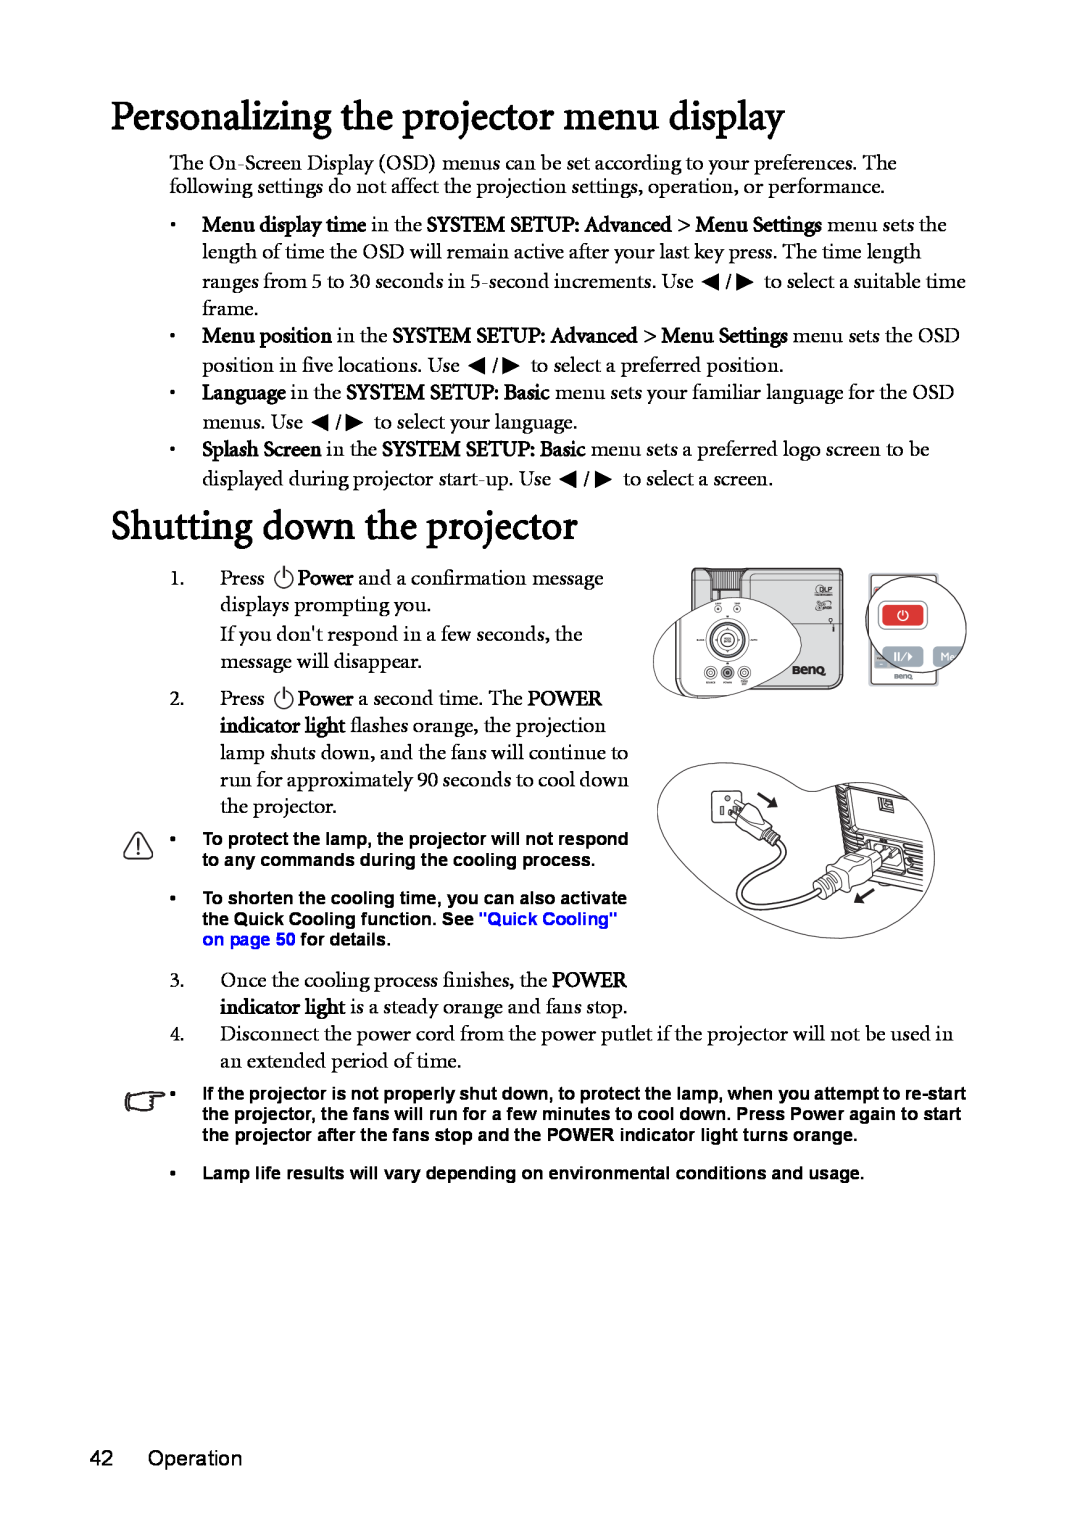 BenQ MP625P user manual Personalizing the projector menu display, Shutting down the projector 